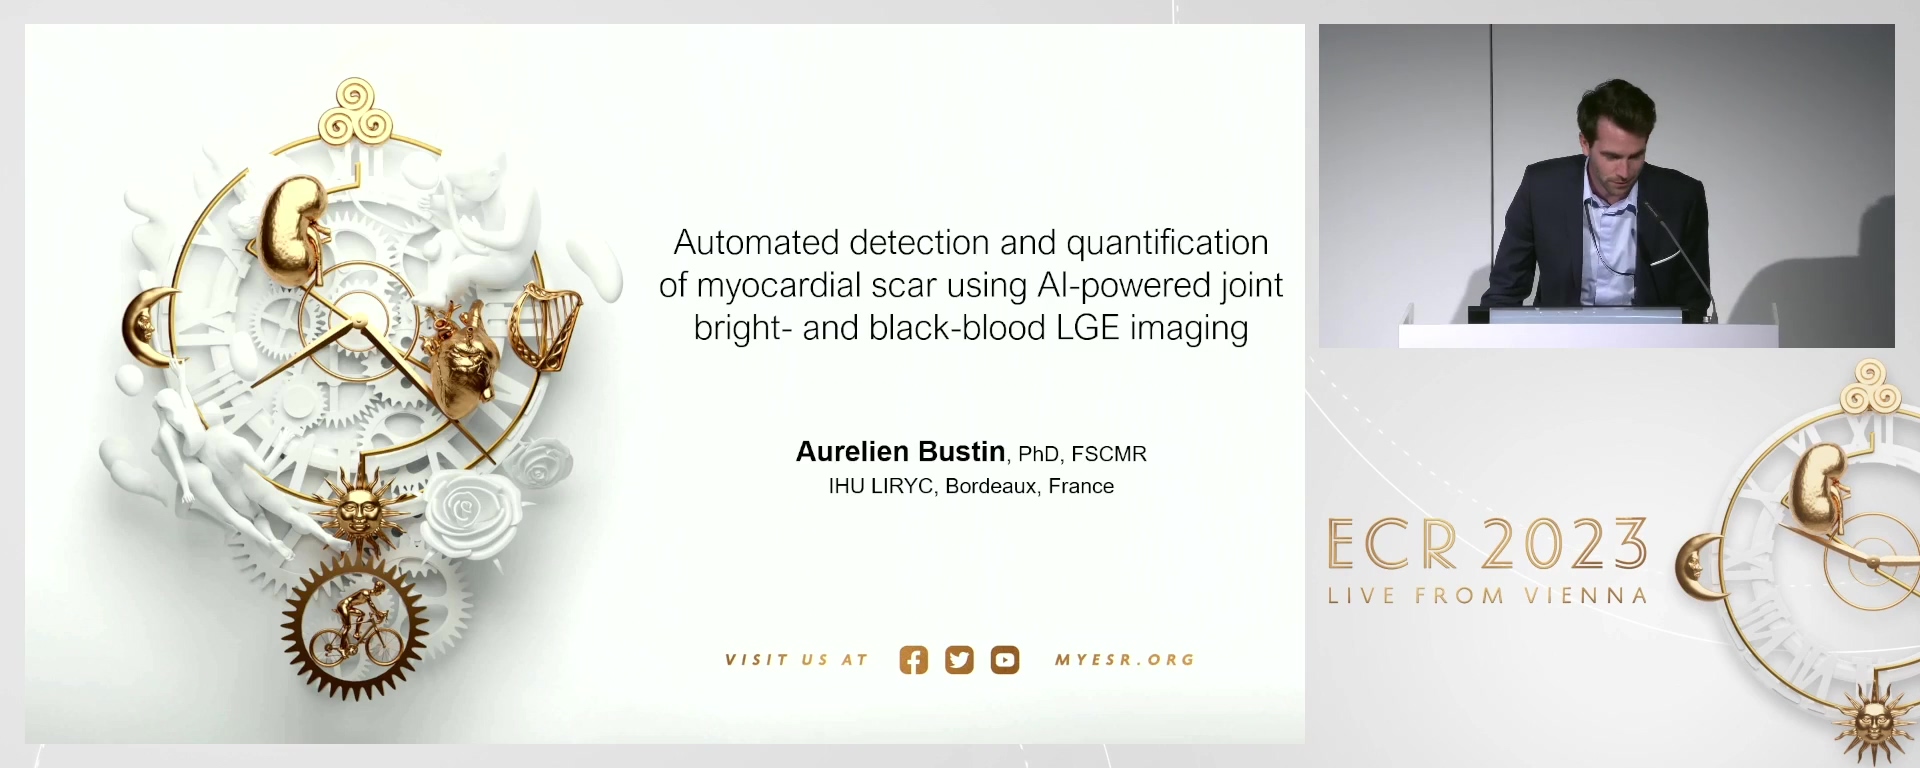 Automated detection and quantification of myocardial scar using AI-powered joint bright- and black-blood LGE imaging - Aurelien  Bustin, PESSAC / FR